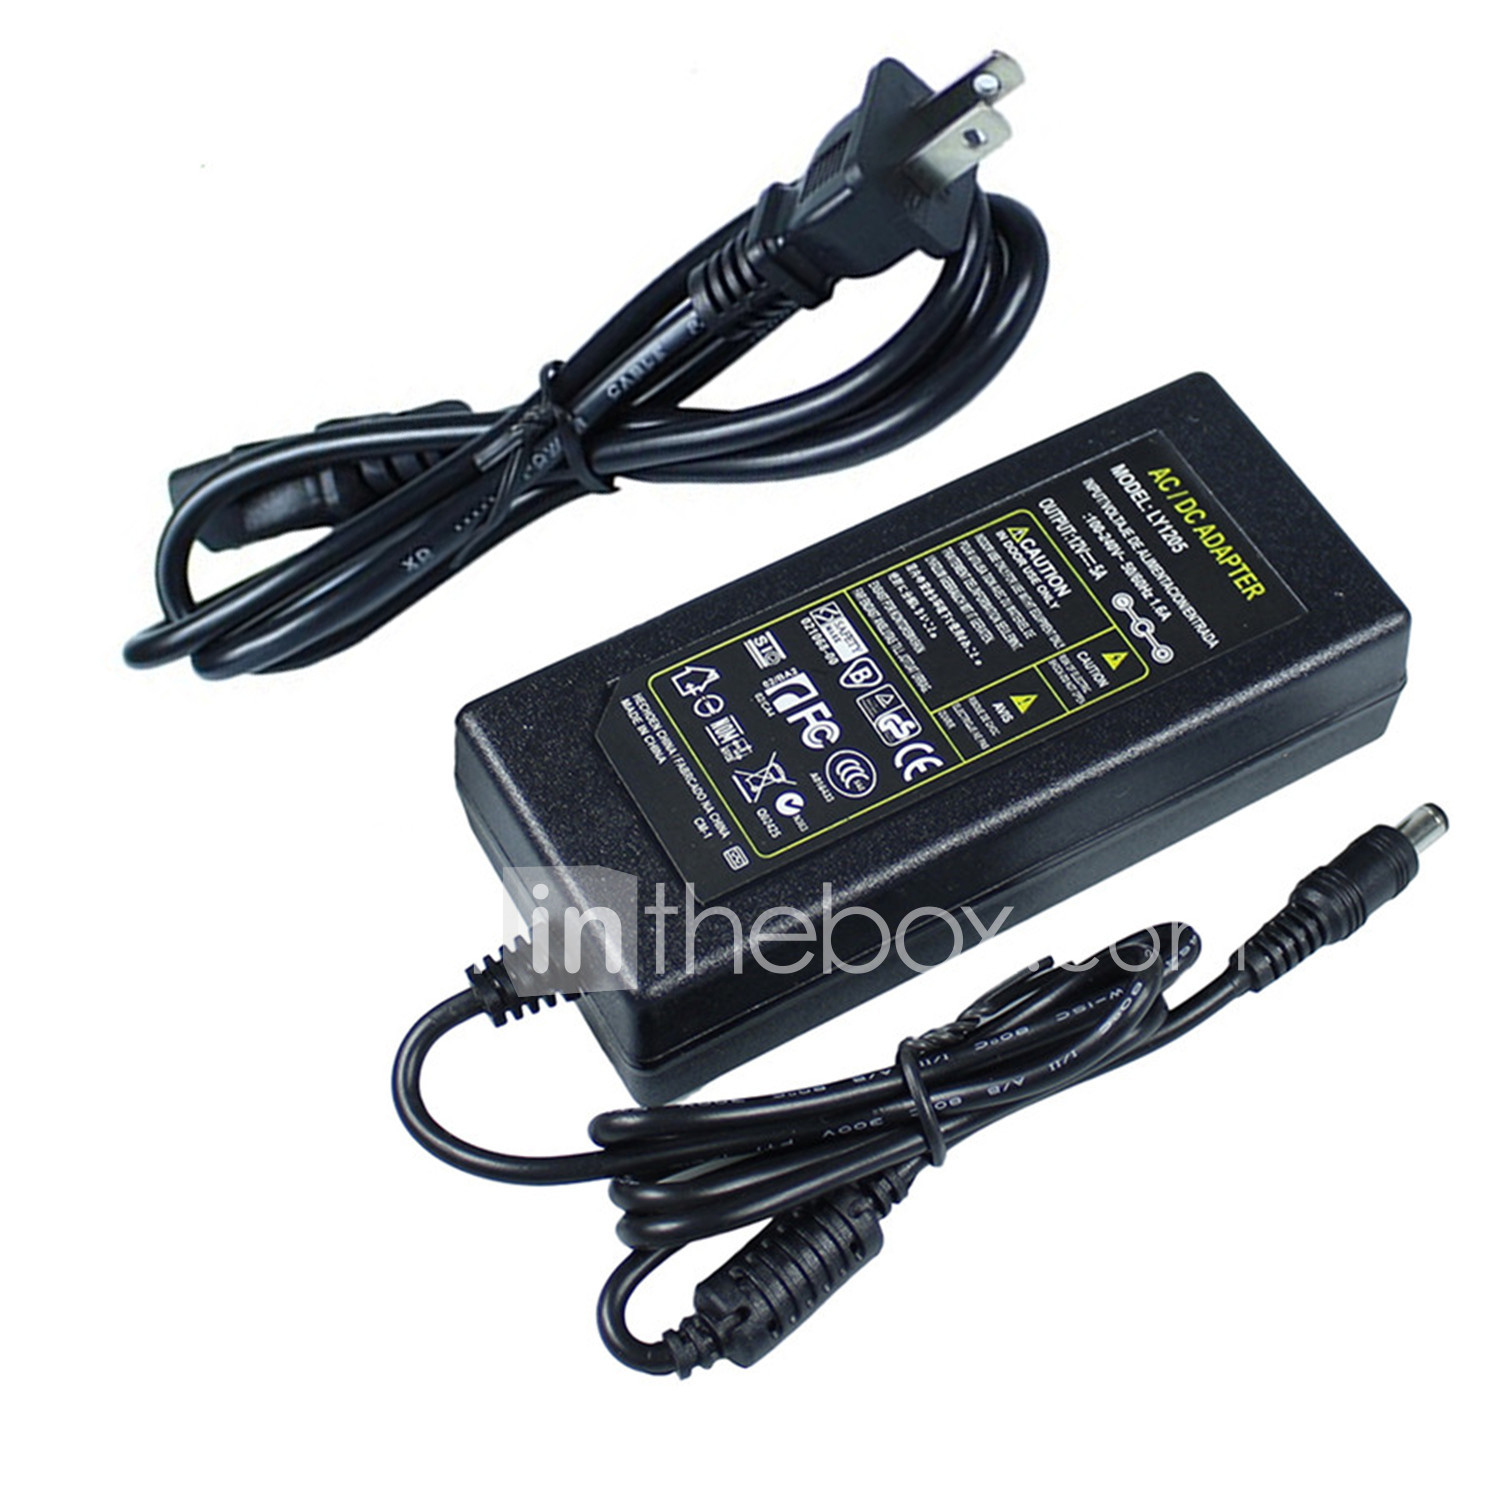 Car Vehicle Power Charger Adapter Cord For Garmin nuvi 700 750 760 780 755 775